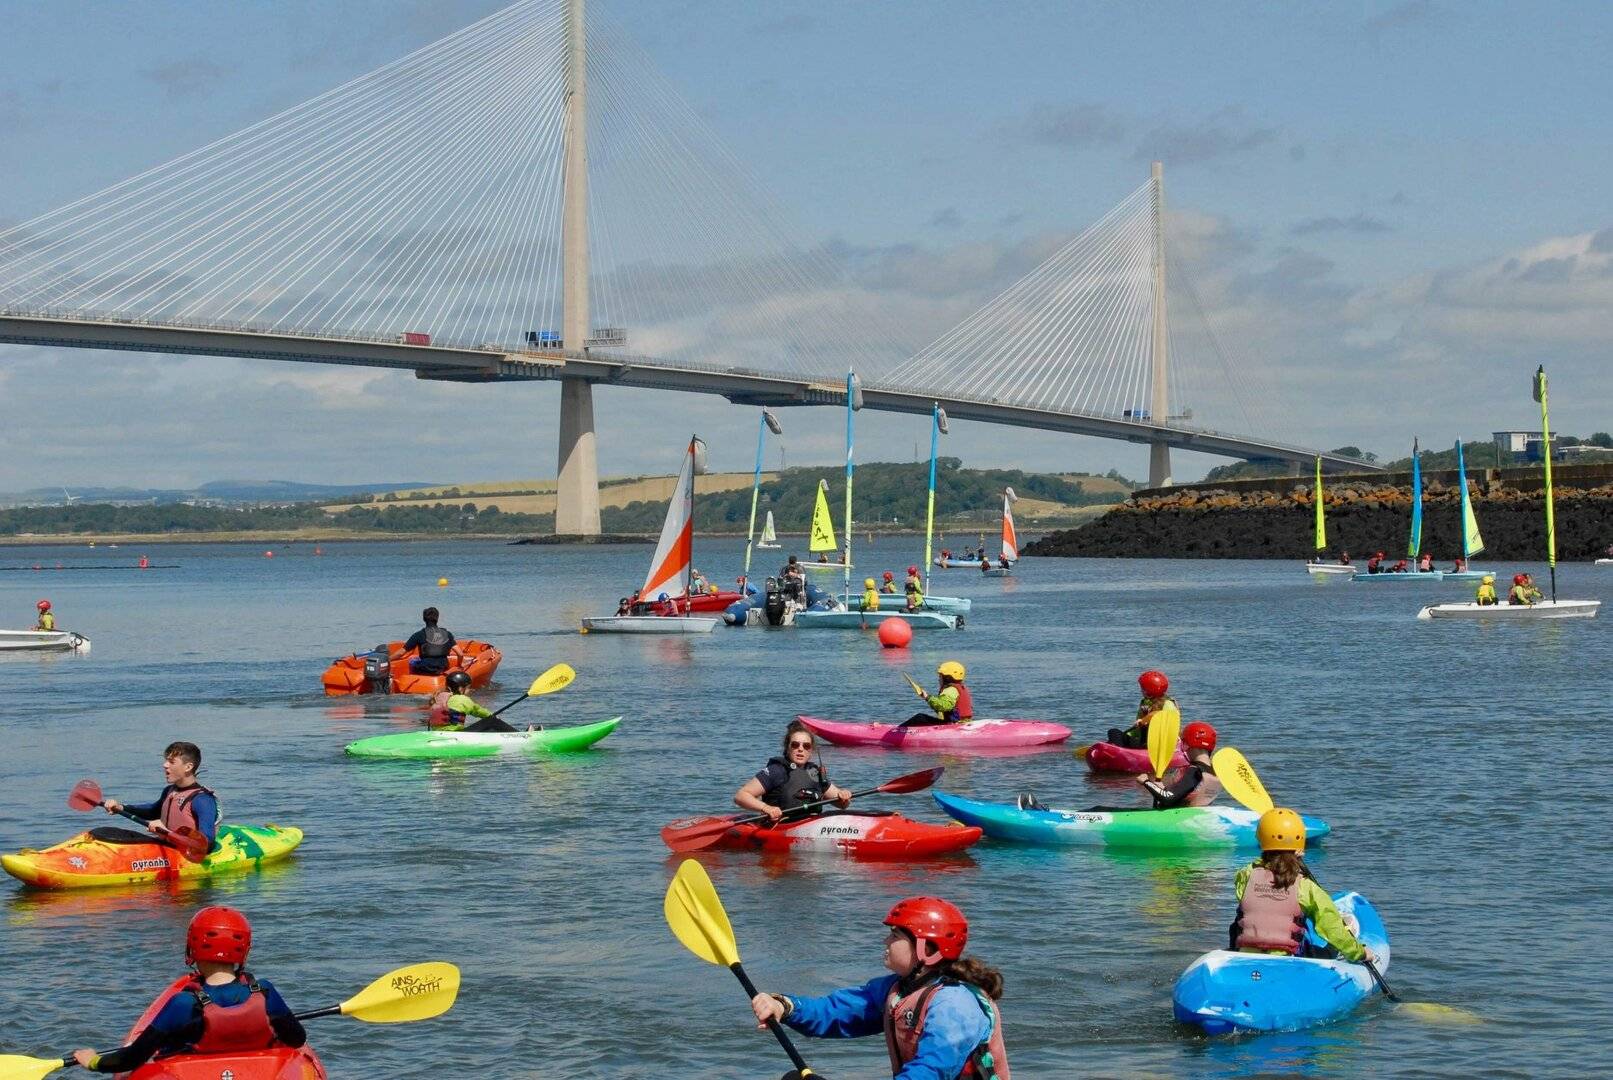 Kayaks and Dinghy sailing under the Queensferry Crossing